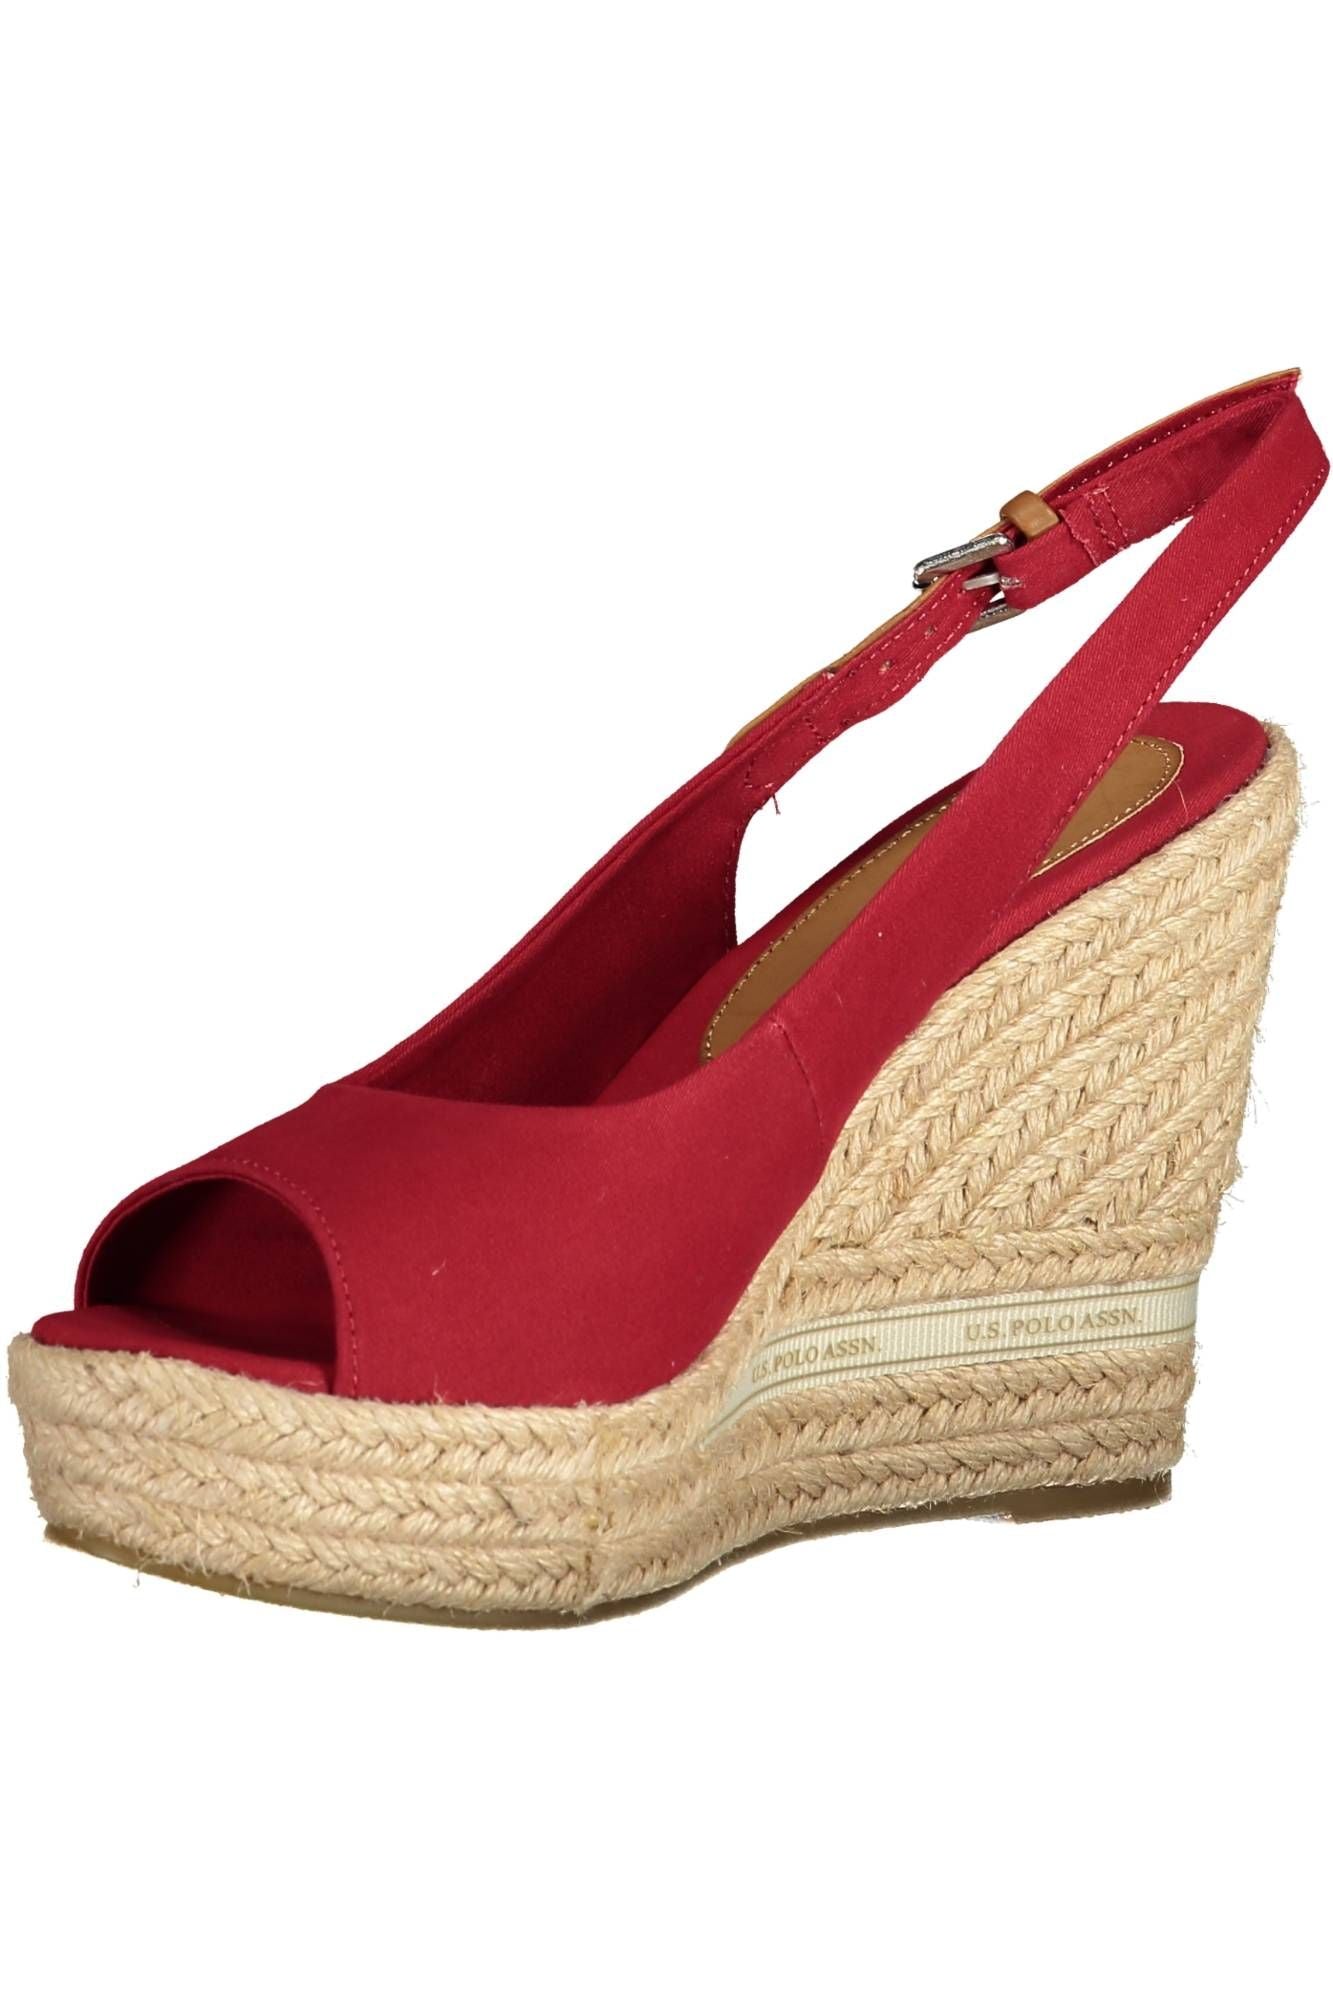 Chic Red Wedge Sandals with Contrasting Accents